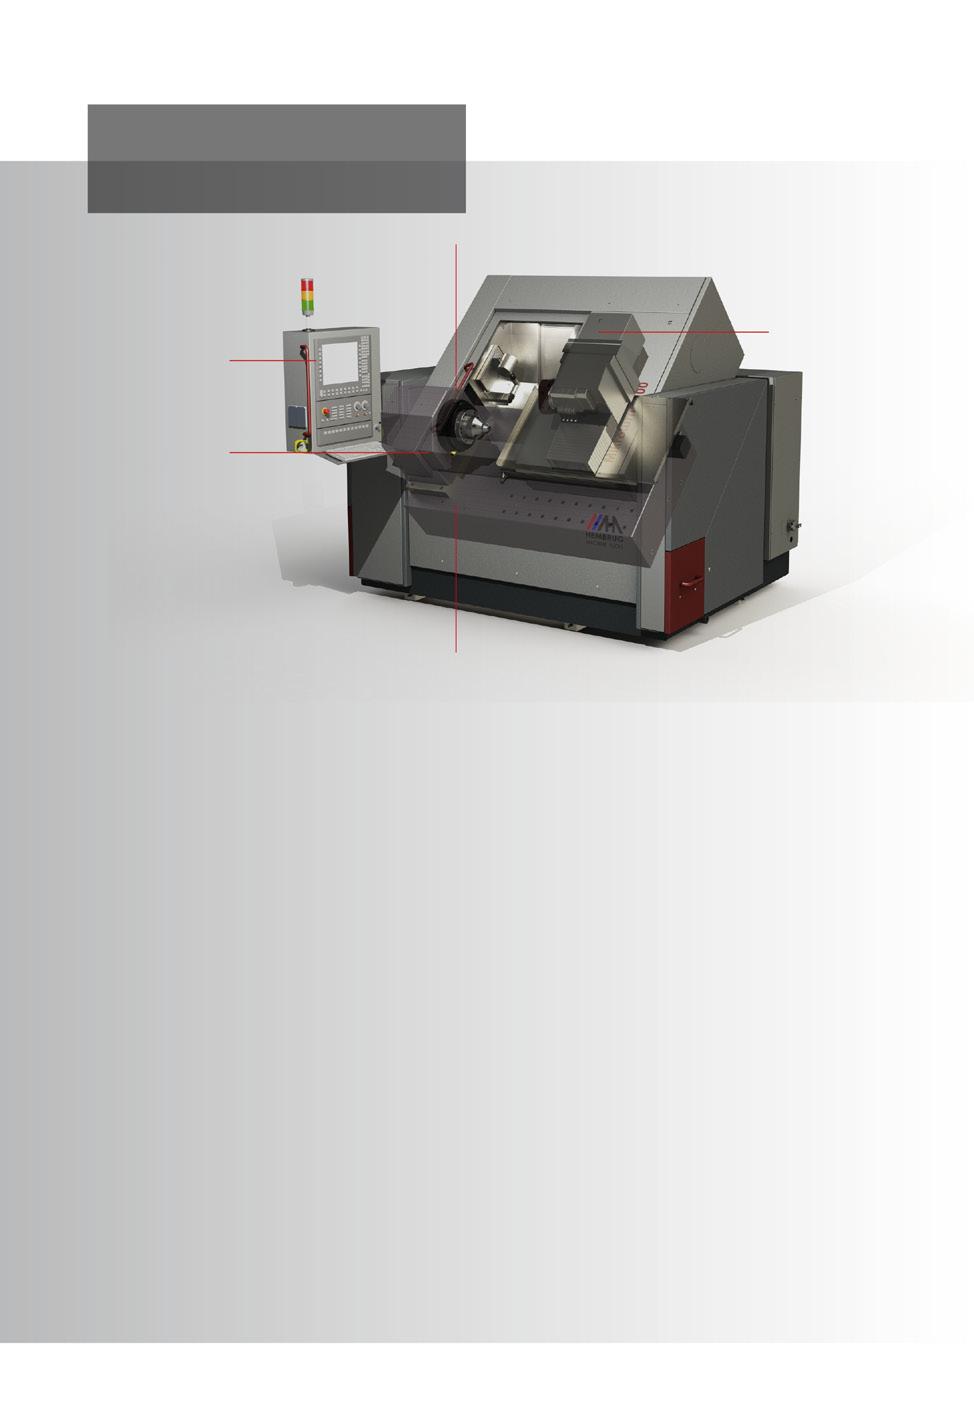 Mikroturn 100 series Hydrostatic main spindle having 0.1 µm run-out Siemens 840D sl CNC control having 0.01 micron resolution Hydrostatic X- and Z-slide having ± 0.